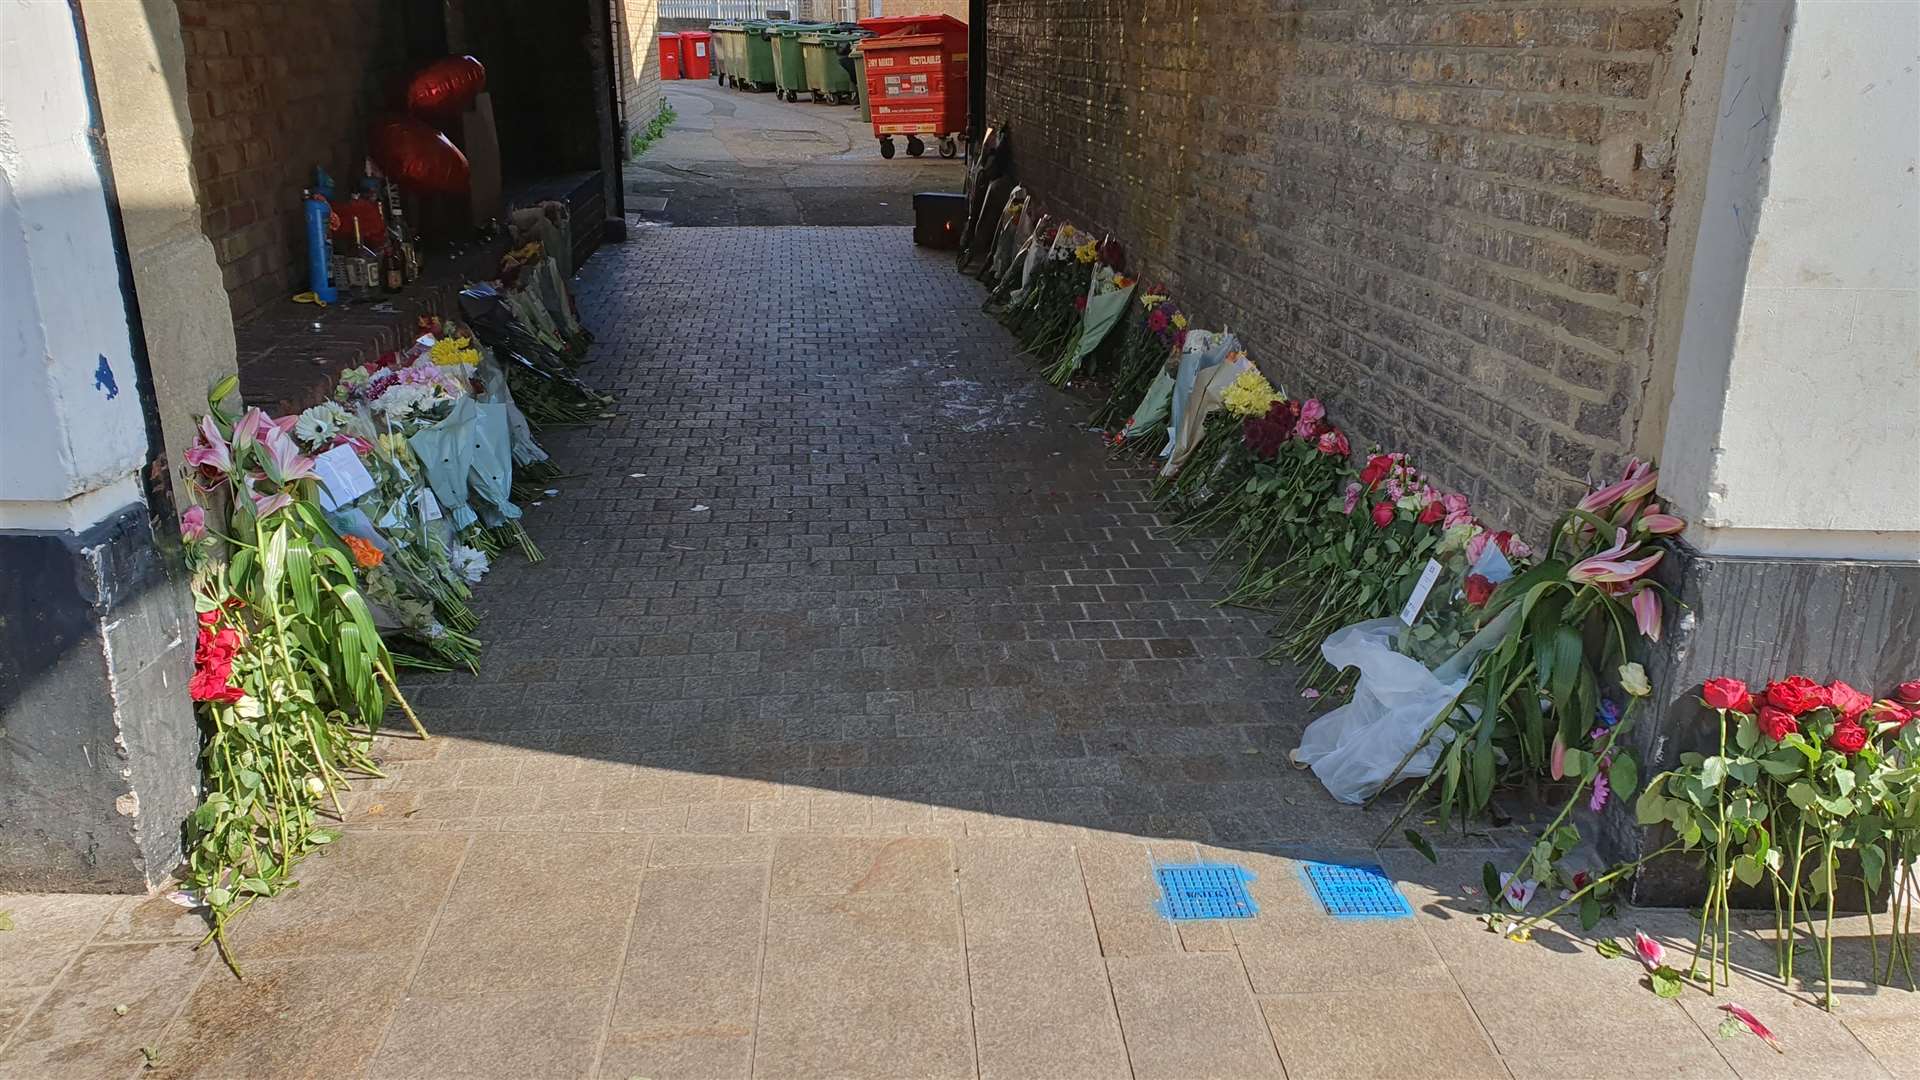 Tributes to an 18-year-old stabbing victim line the alleyway in Dartford High Street